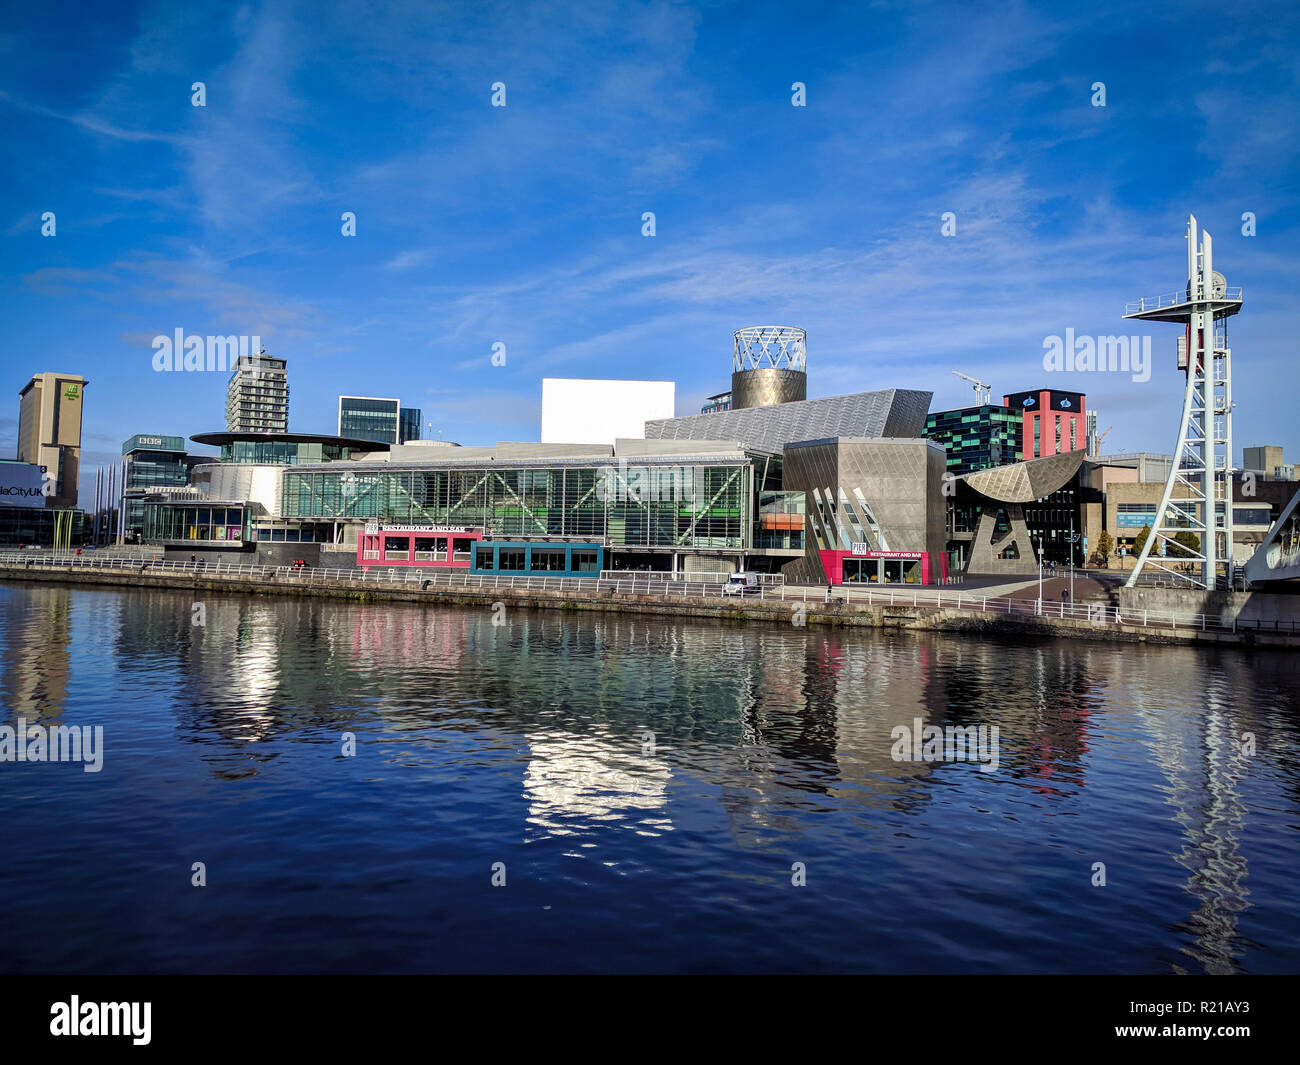 The Lowry in Manchester - beautiful image of this modern architectural complex - amazing city skyline in perfect weather Stock Photo